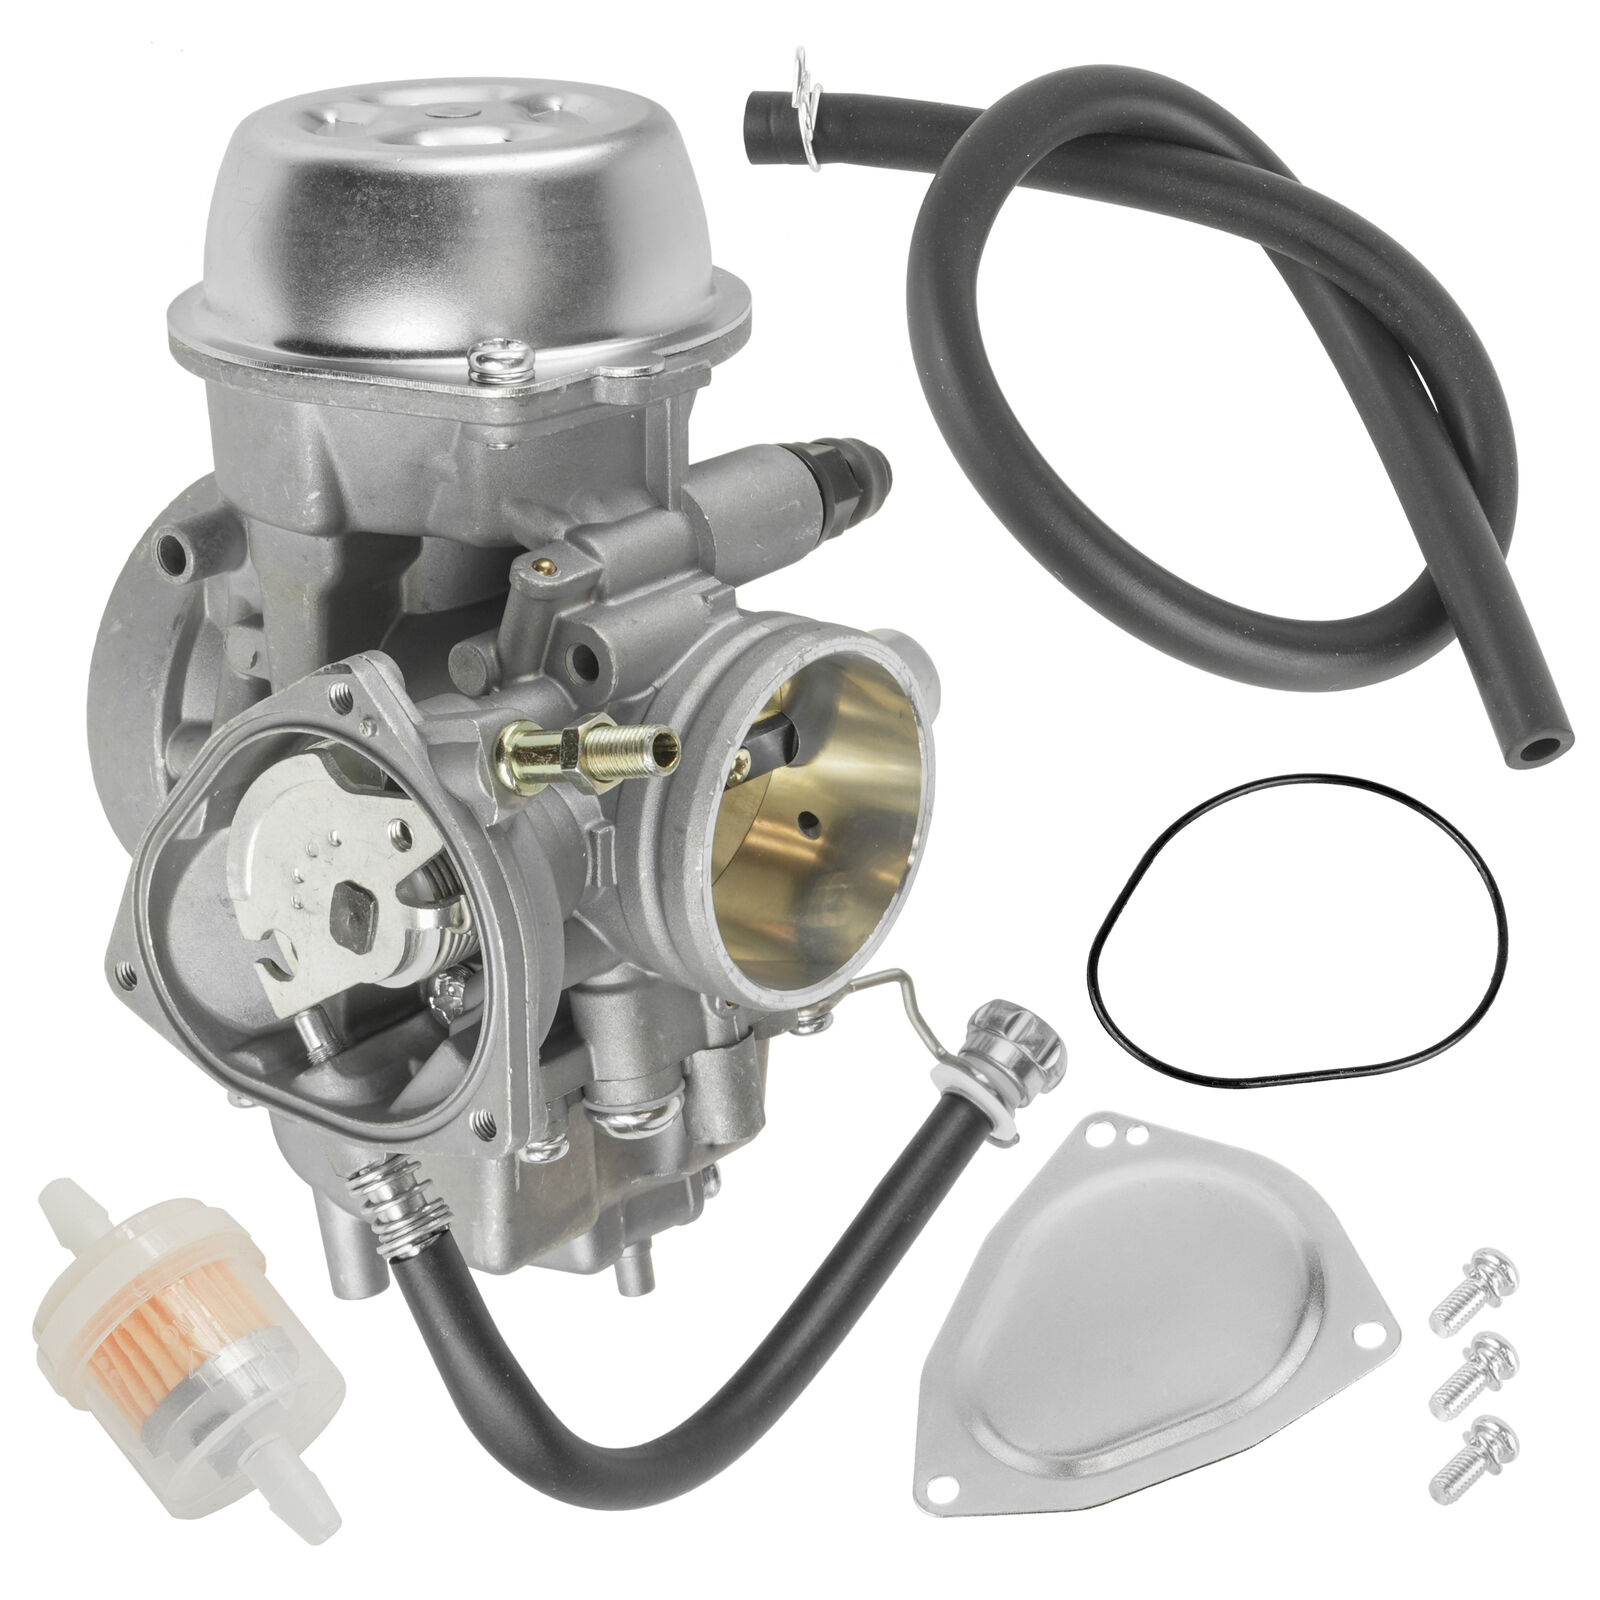 Carburetor for Yamaha Grizzly 600 YFM600 1998-2001 New Carb